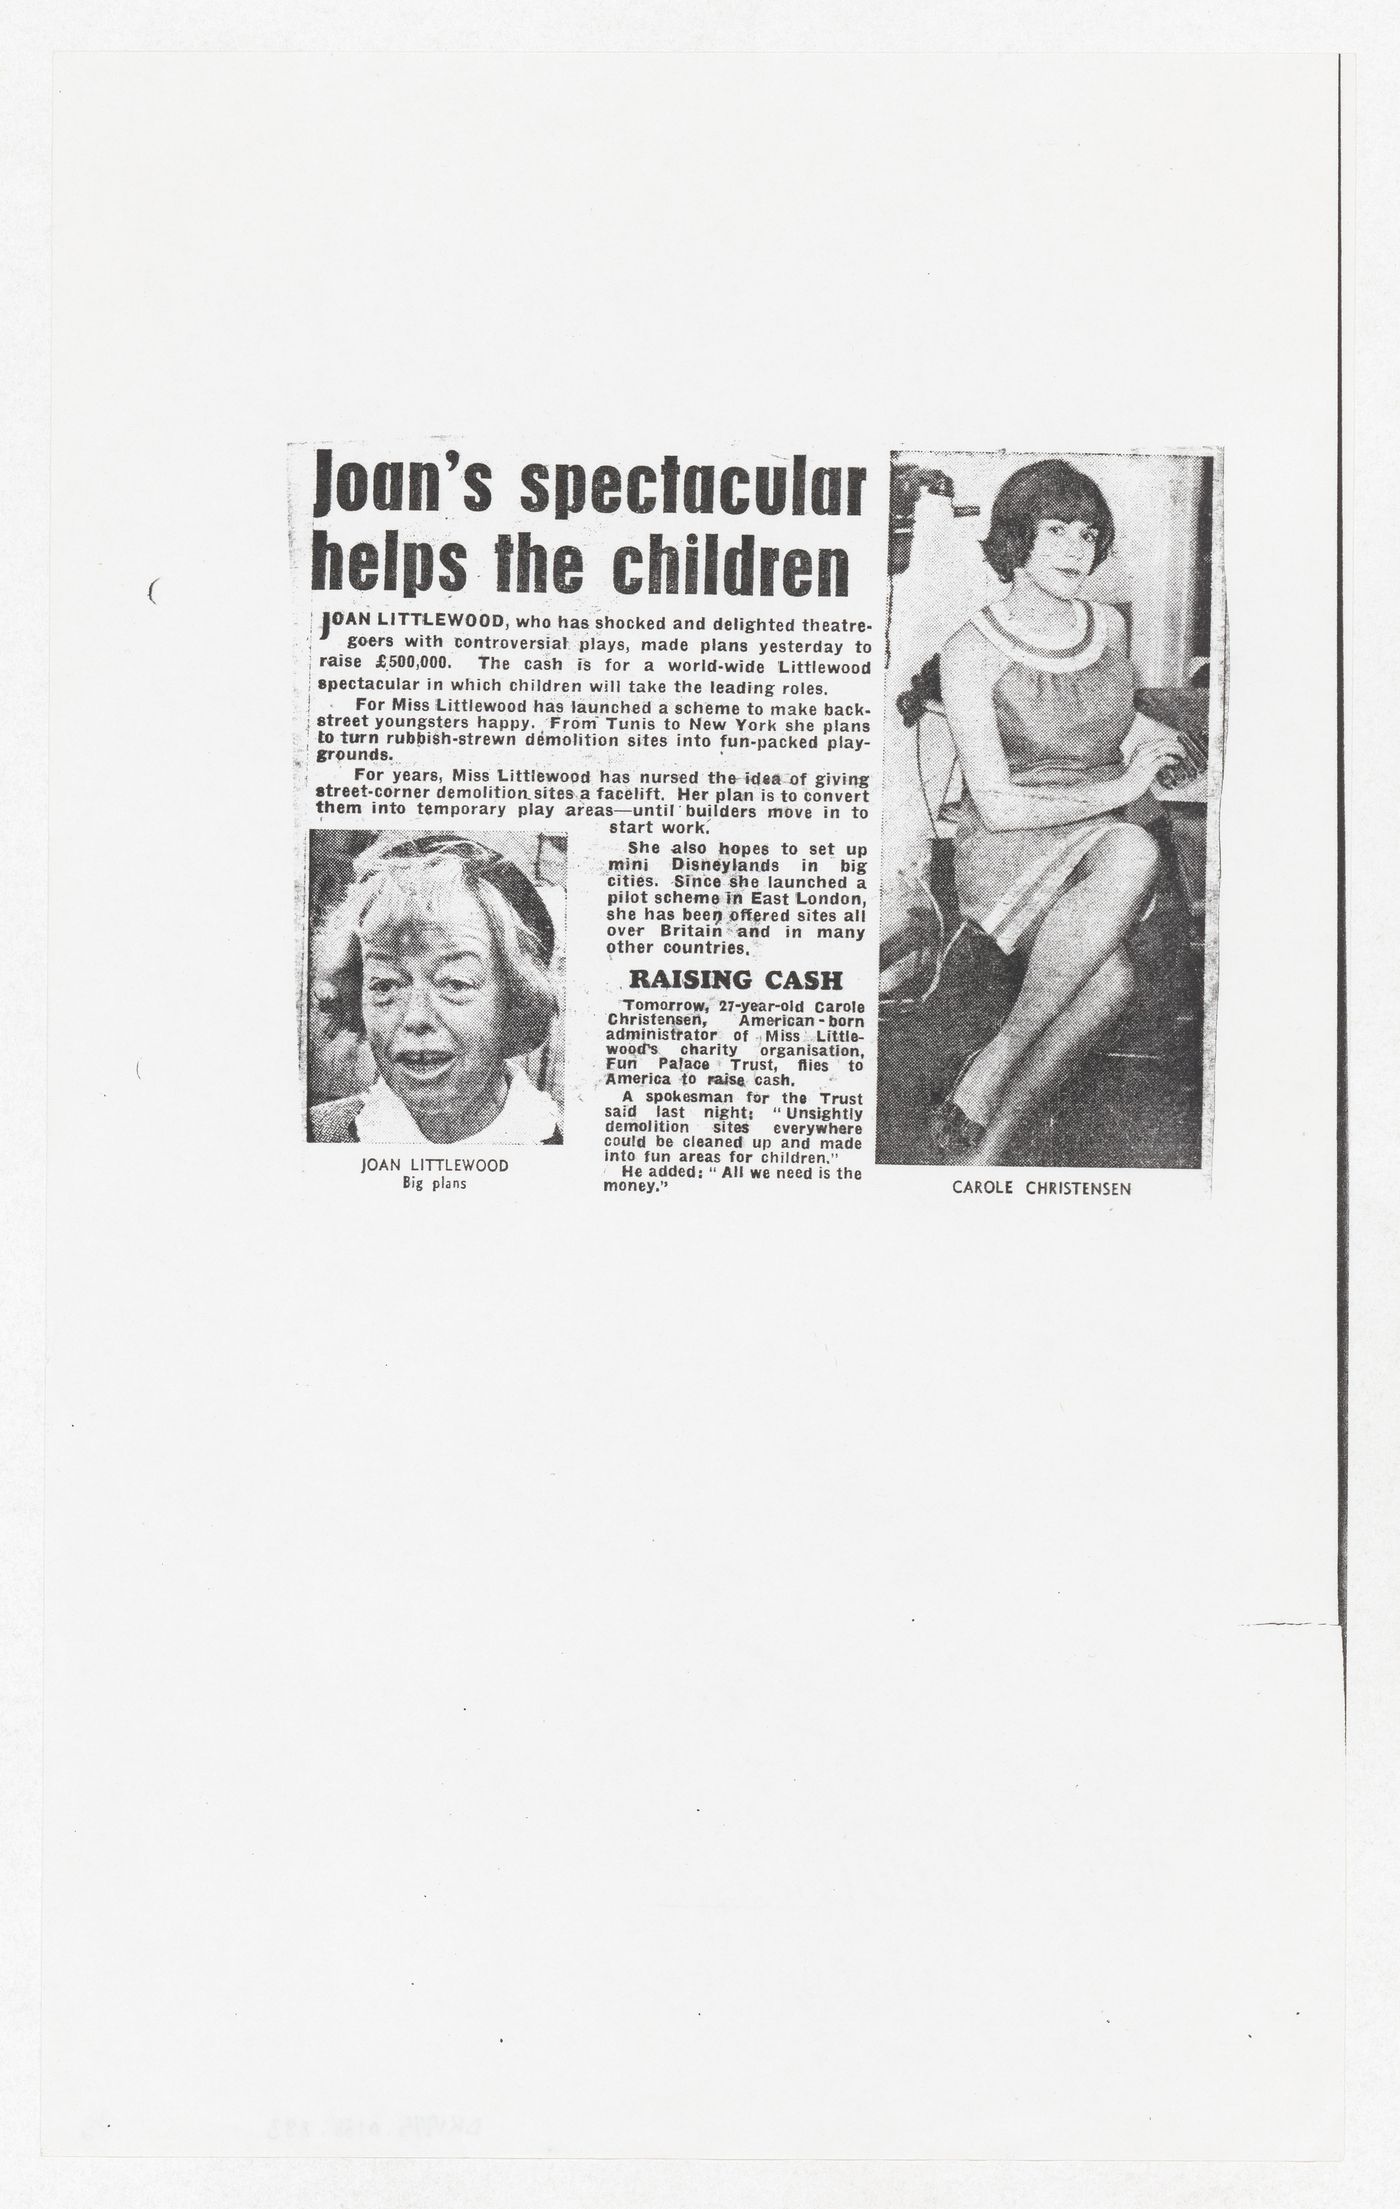 Copy of the article "Joan's spectacular helps the children"